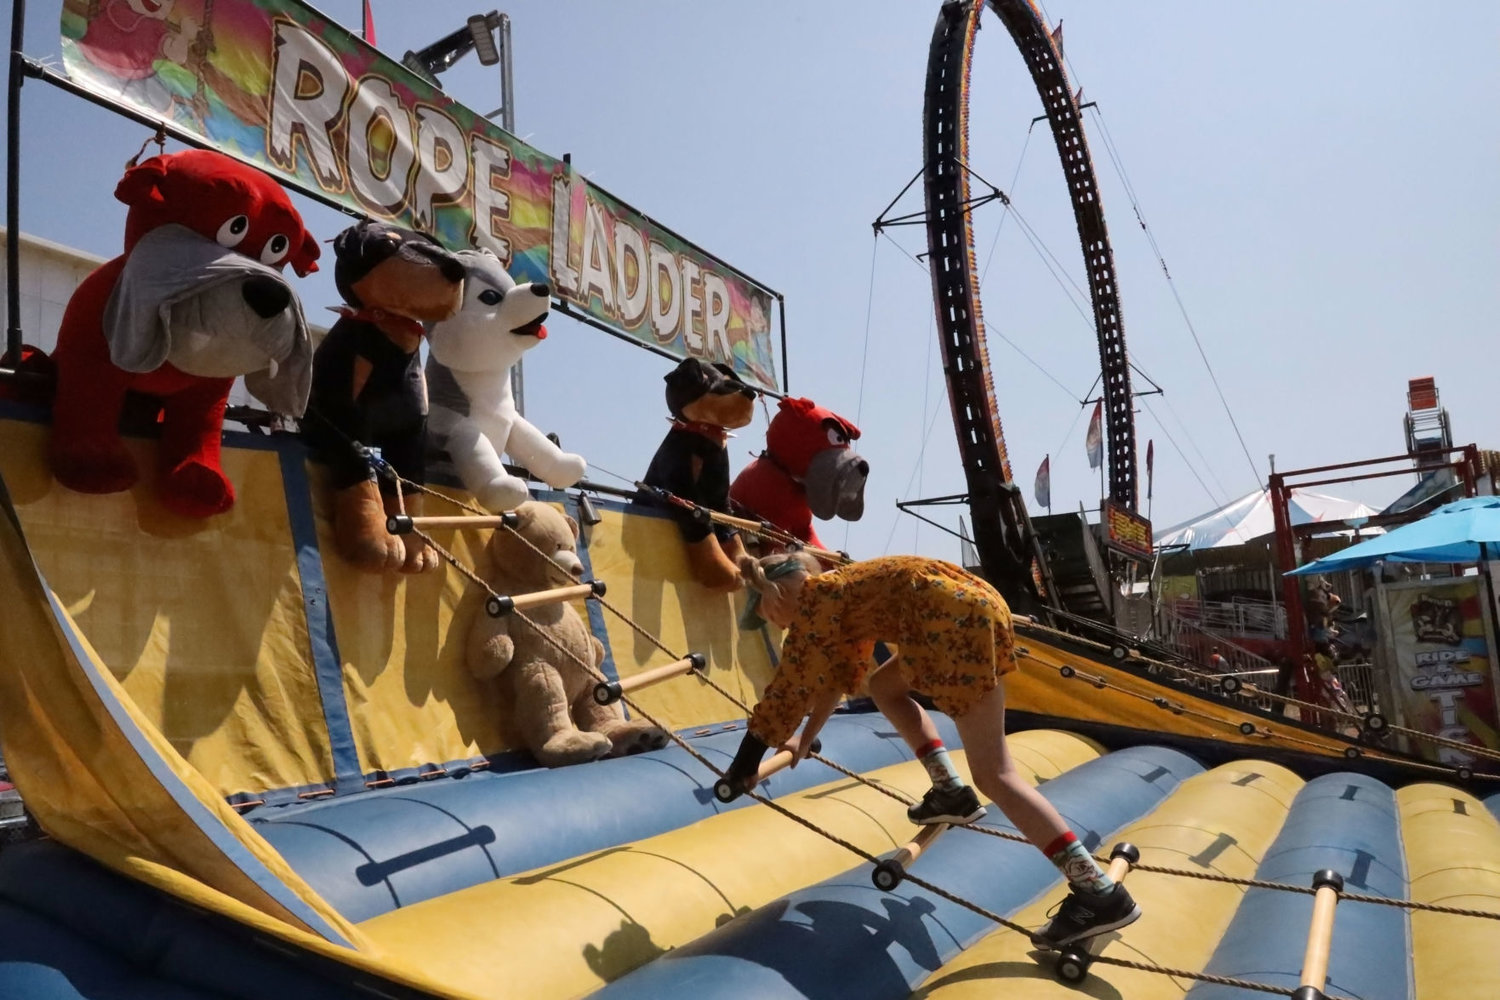 Ten-year-old Sailor Boreen from Vancouver climbs the rope in hopes of winning the husky at the top during the Clark County Fair Aug 3, 2019